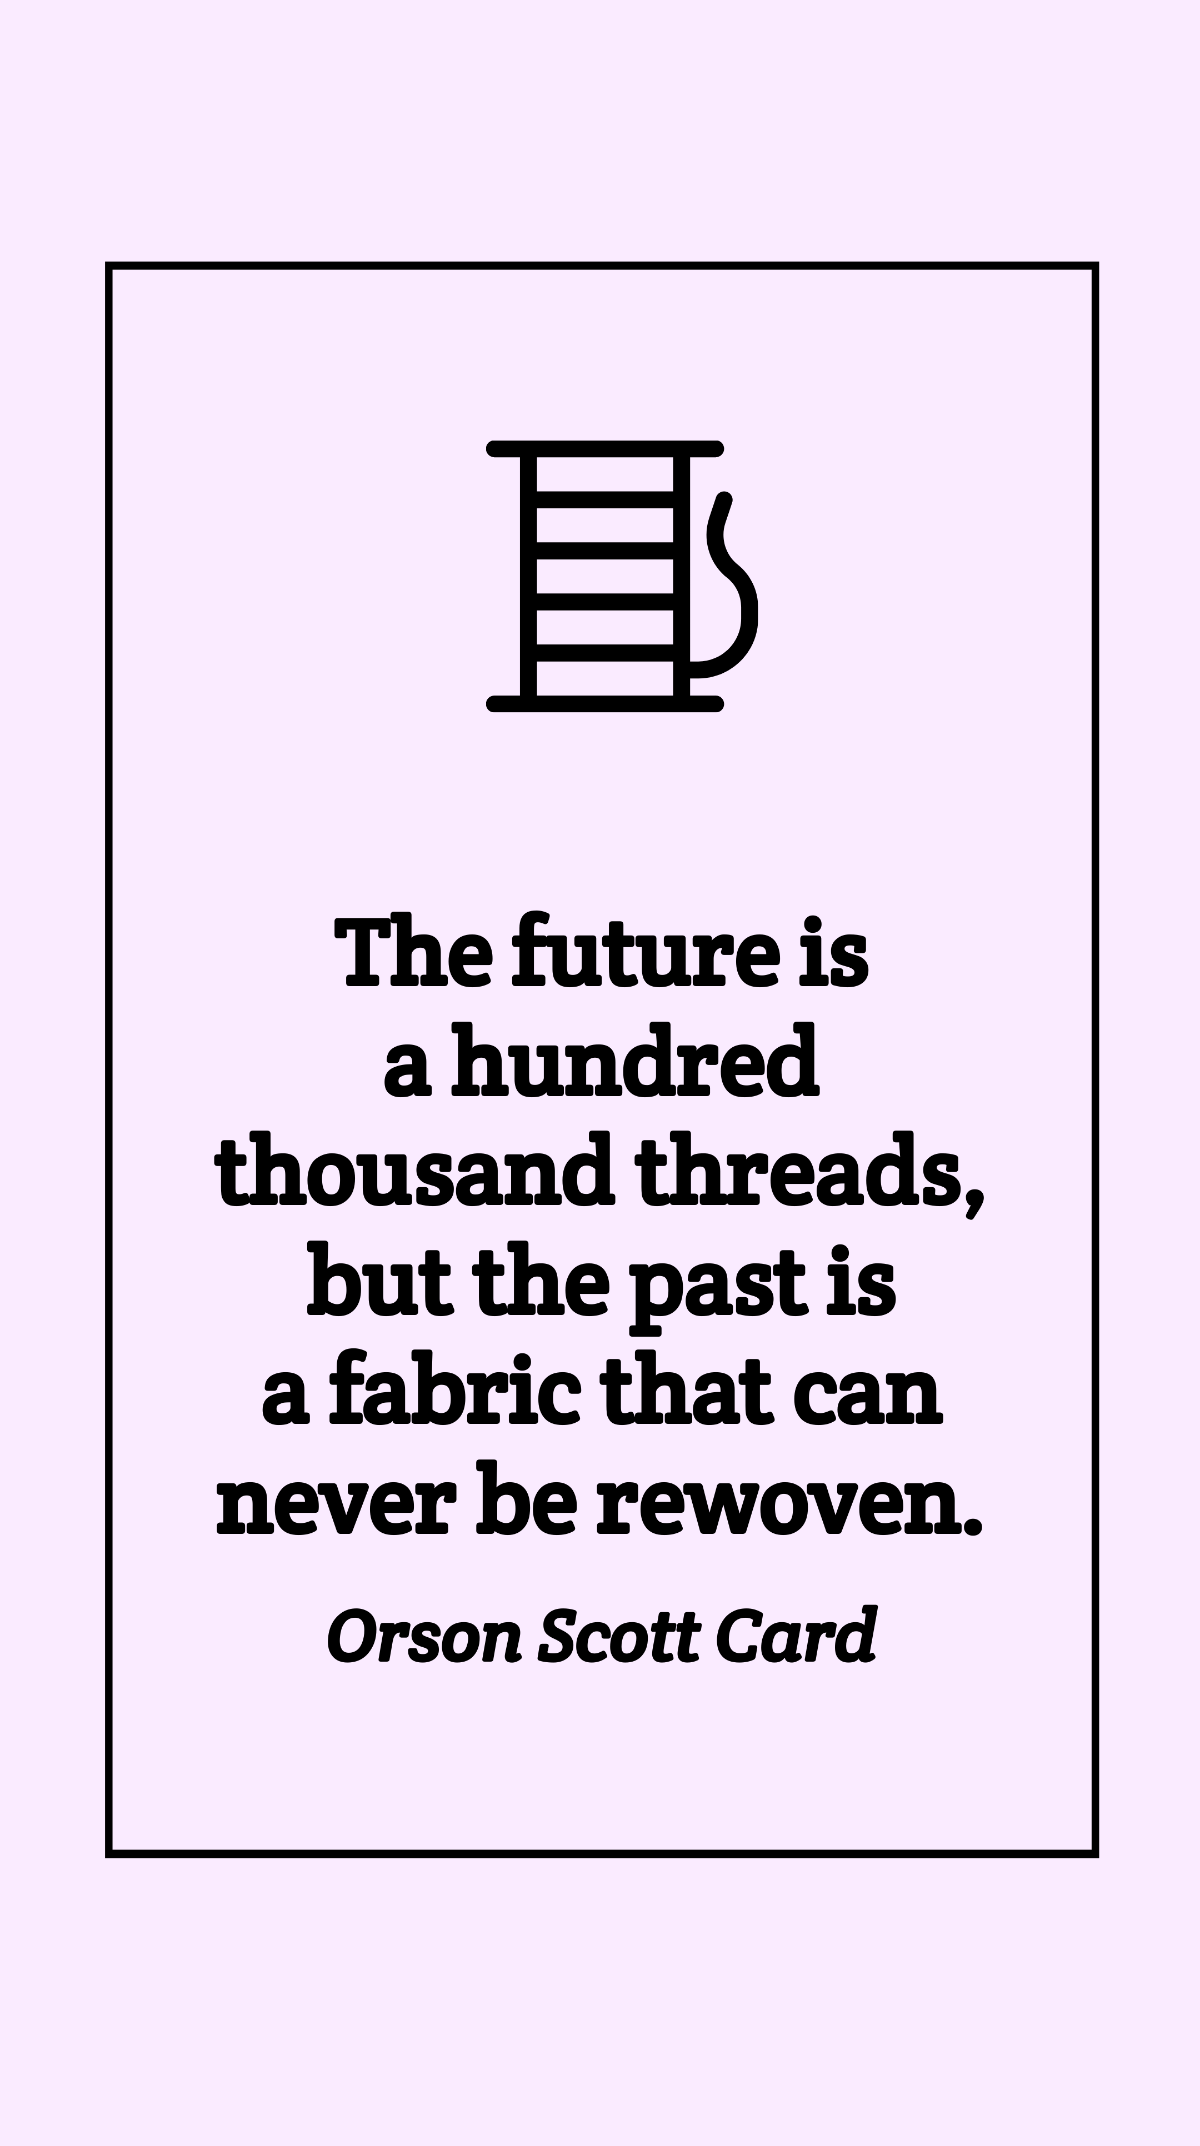 Orson Scott Card - The future is a hundred thousand threads, but the past is a fabric that can never be rewoven. Template